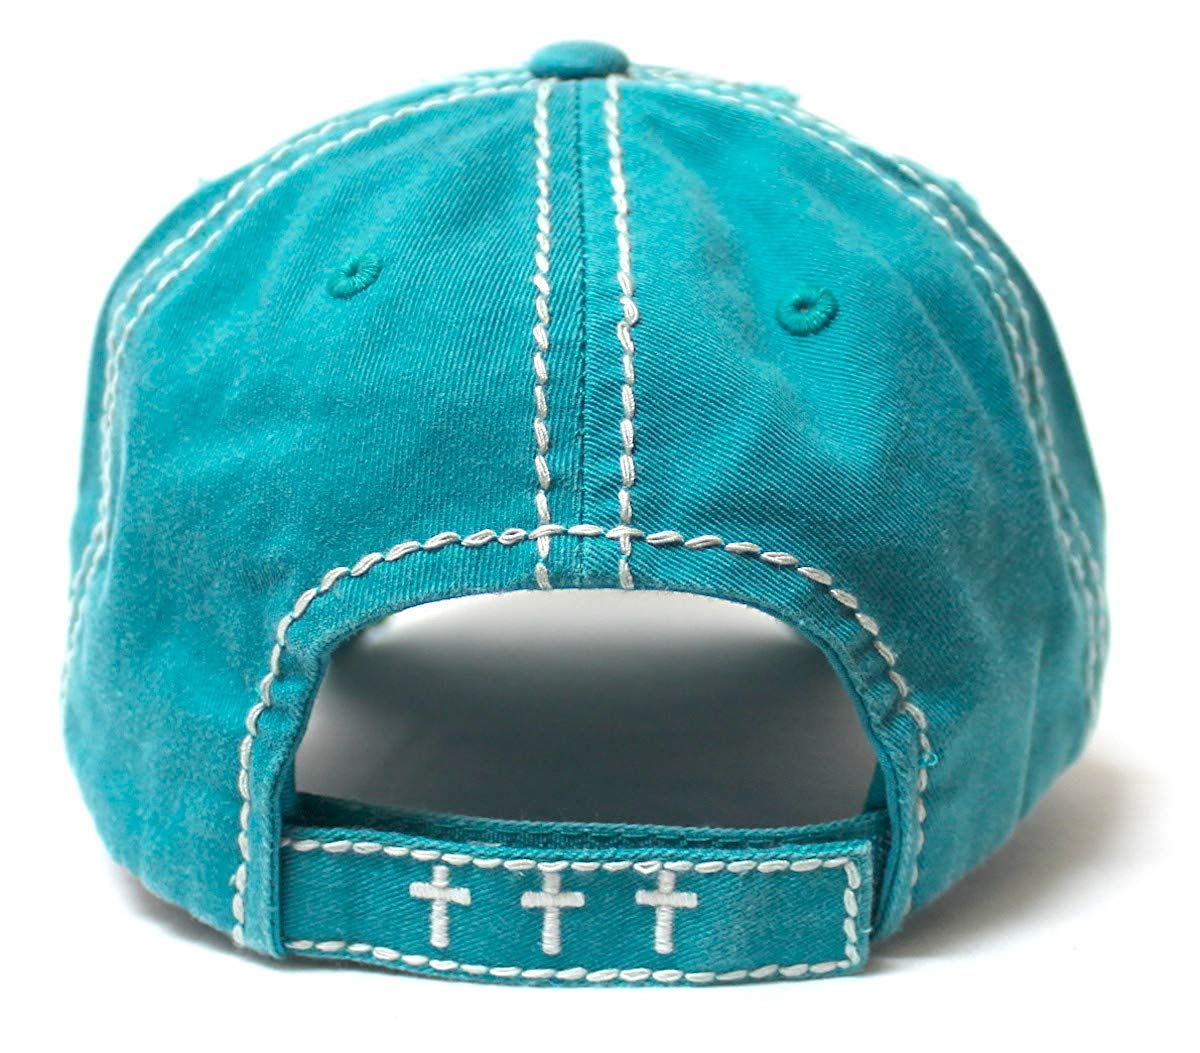 Women's Ballcap Why Y'all Tryin' to Test The Jesus in Me? Christian Patch Embroidery Vintage Hat, Jewel Turquoise - Caps 'N Vintage 